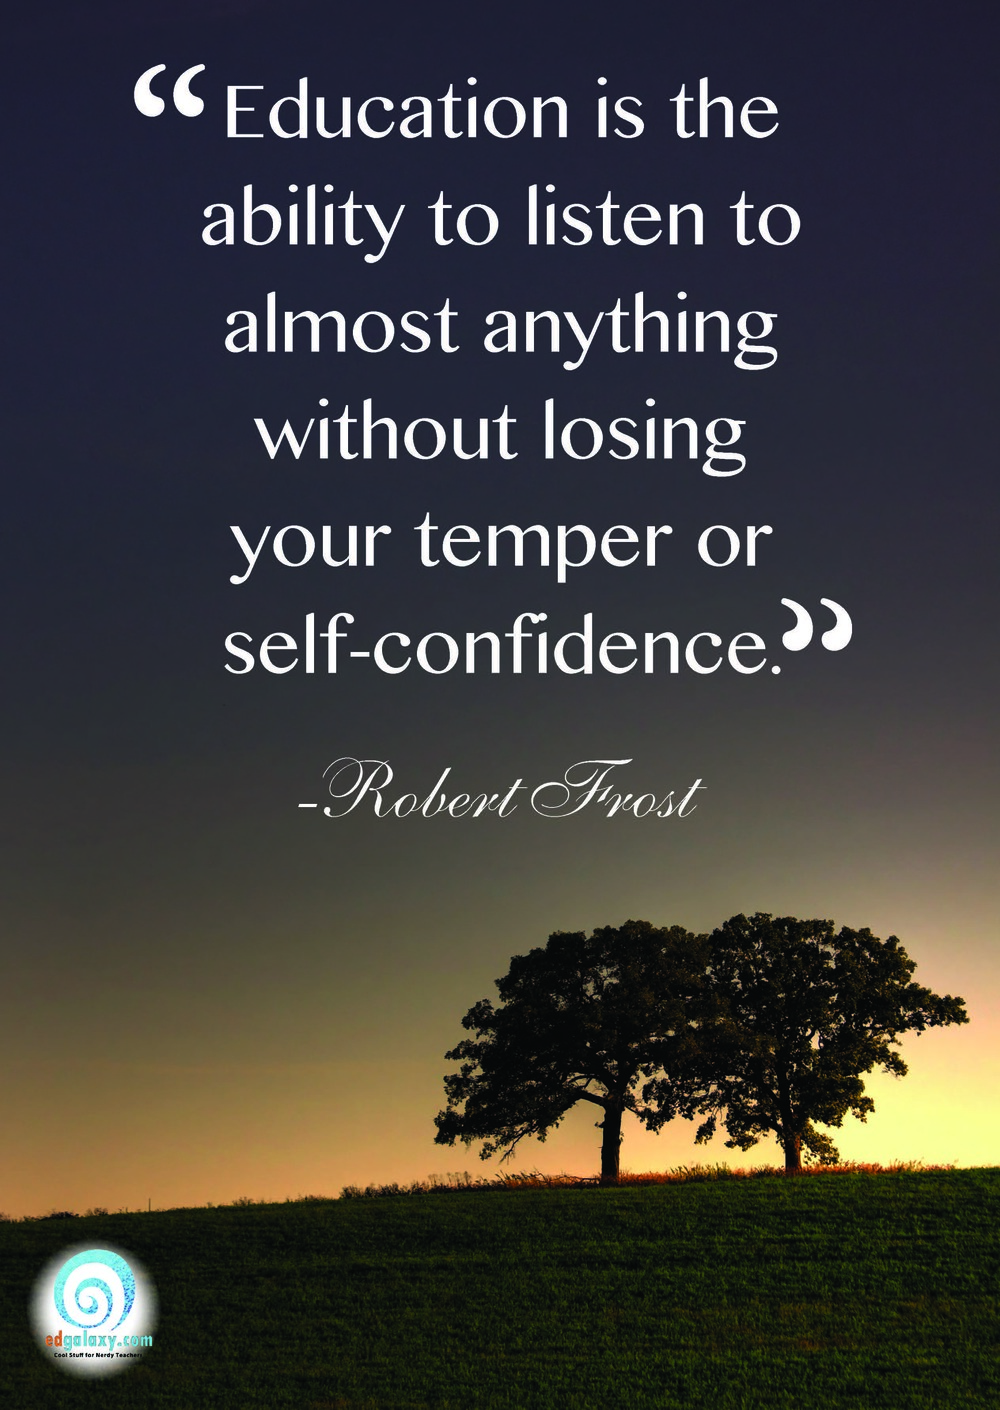 Education is the ability to listen to almost anything without losing your temper or your self-confidence. Robert Frost